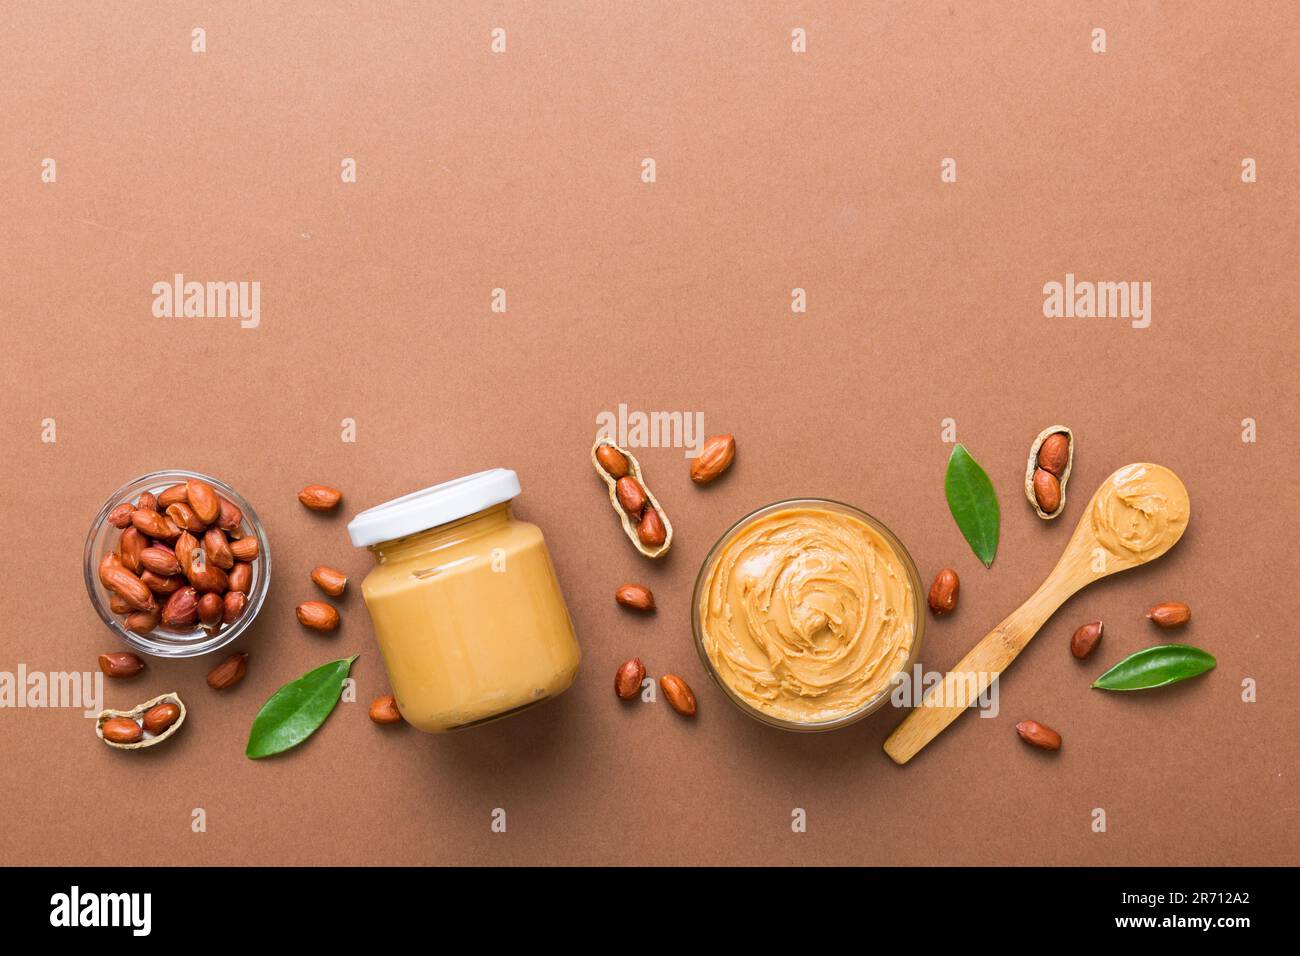 https://c8.alamy.com/comp/2R712A2/bowl-of-peanut-butter-and-peanuts-on-table-background-top-view-with-copy-space-creamy-peanut-pasta-in-small-bowl-2R712A2.jpg